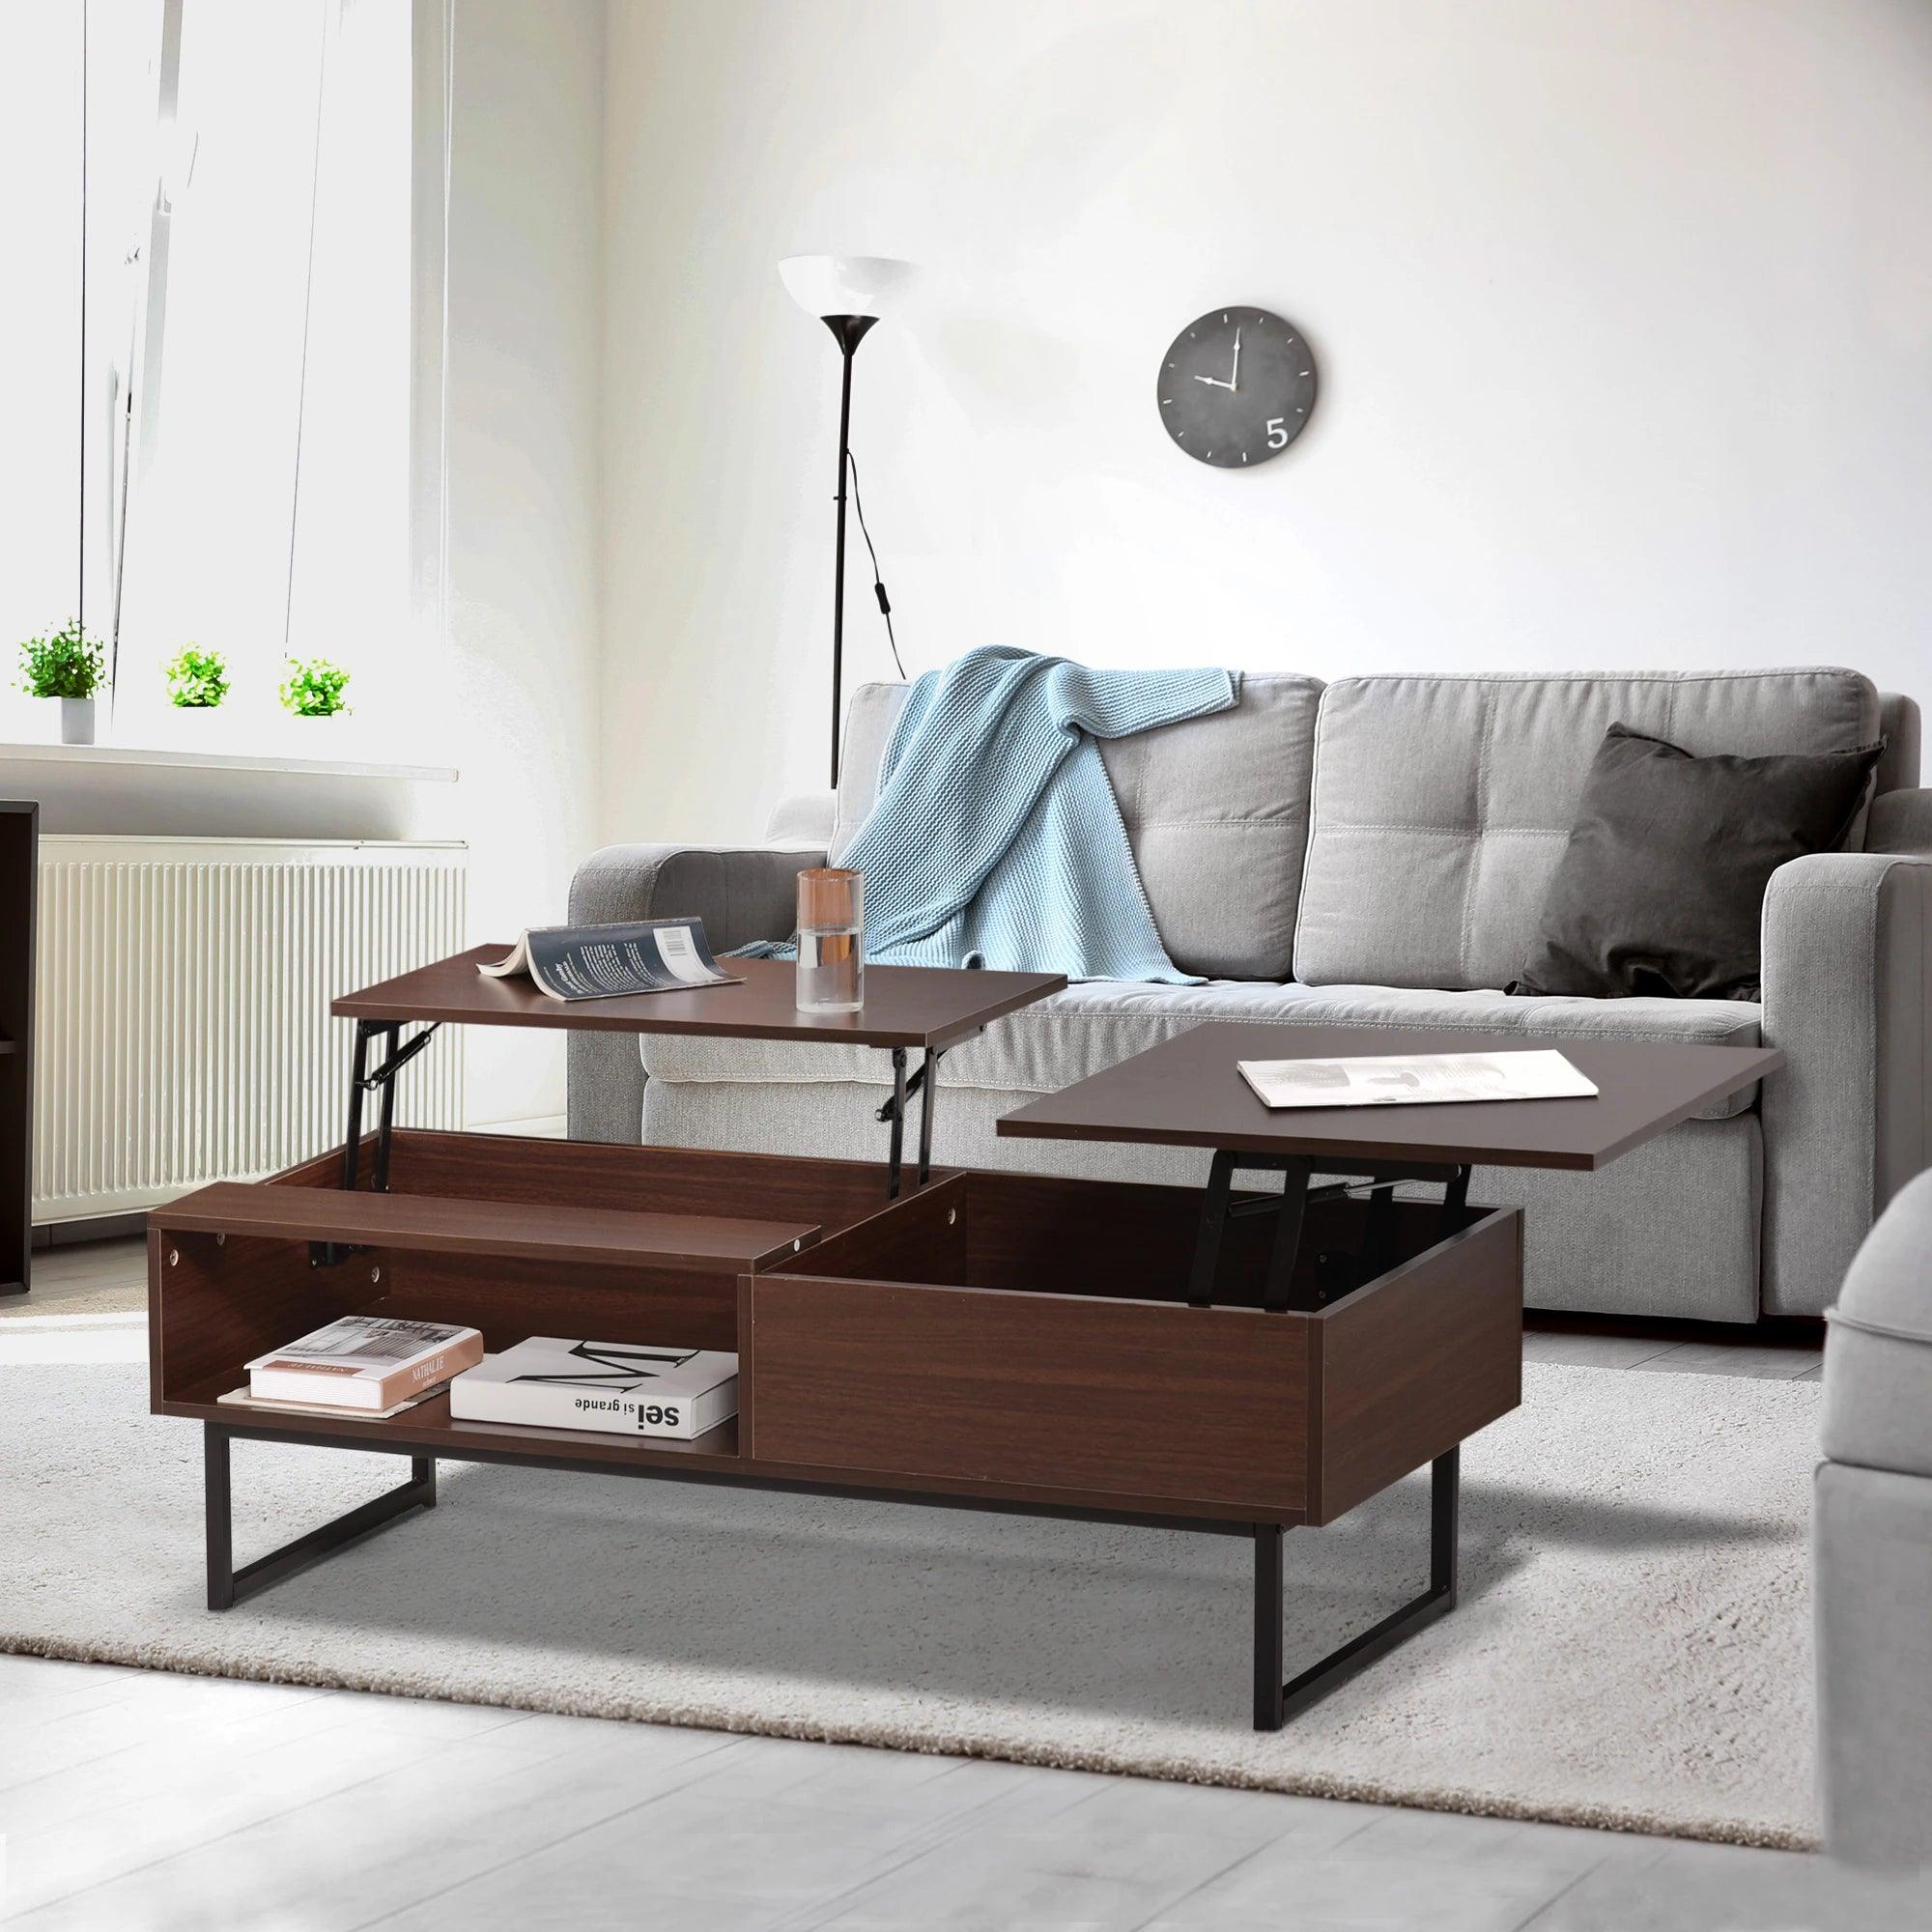 Modern Lift Top Coffee Table with Hidden Storage Compartment and Metal Frame, Center Table for Living Room, Brown